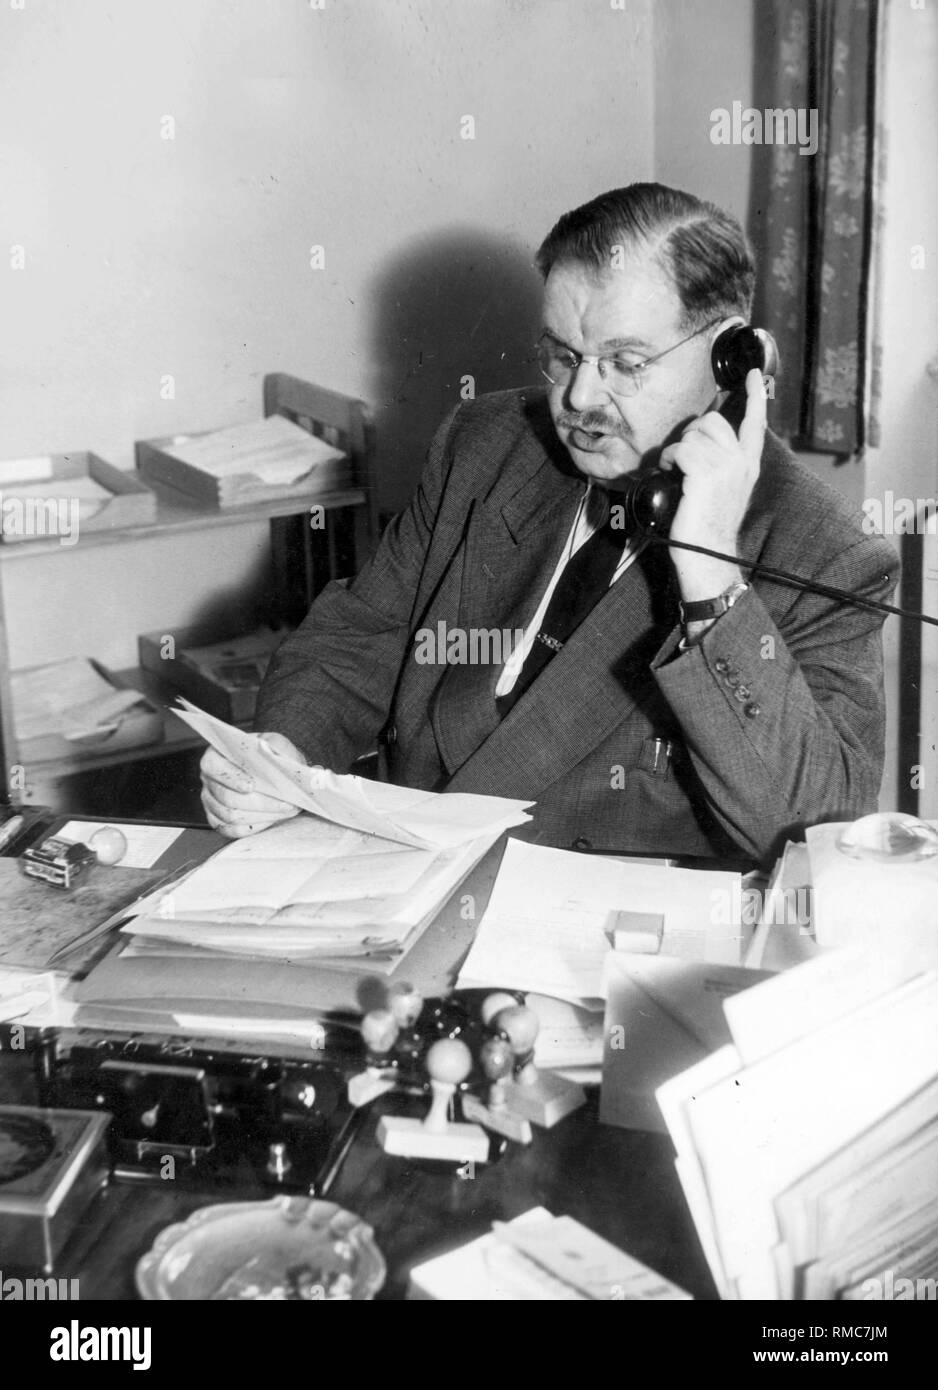 Philipp Auerbach (1906-1952), President of the Landesentschaedigungsamt (Land Compensation Office), telephones in his office. Undated image, probably around the year 1950. Stock Photo